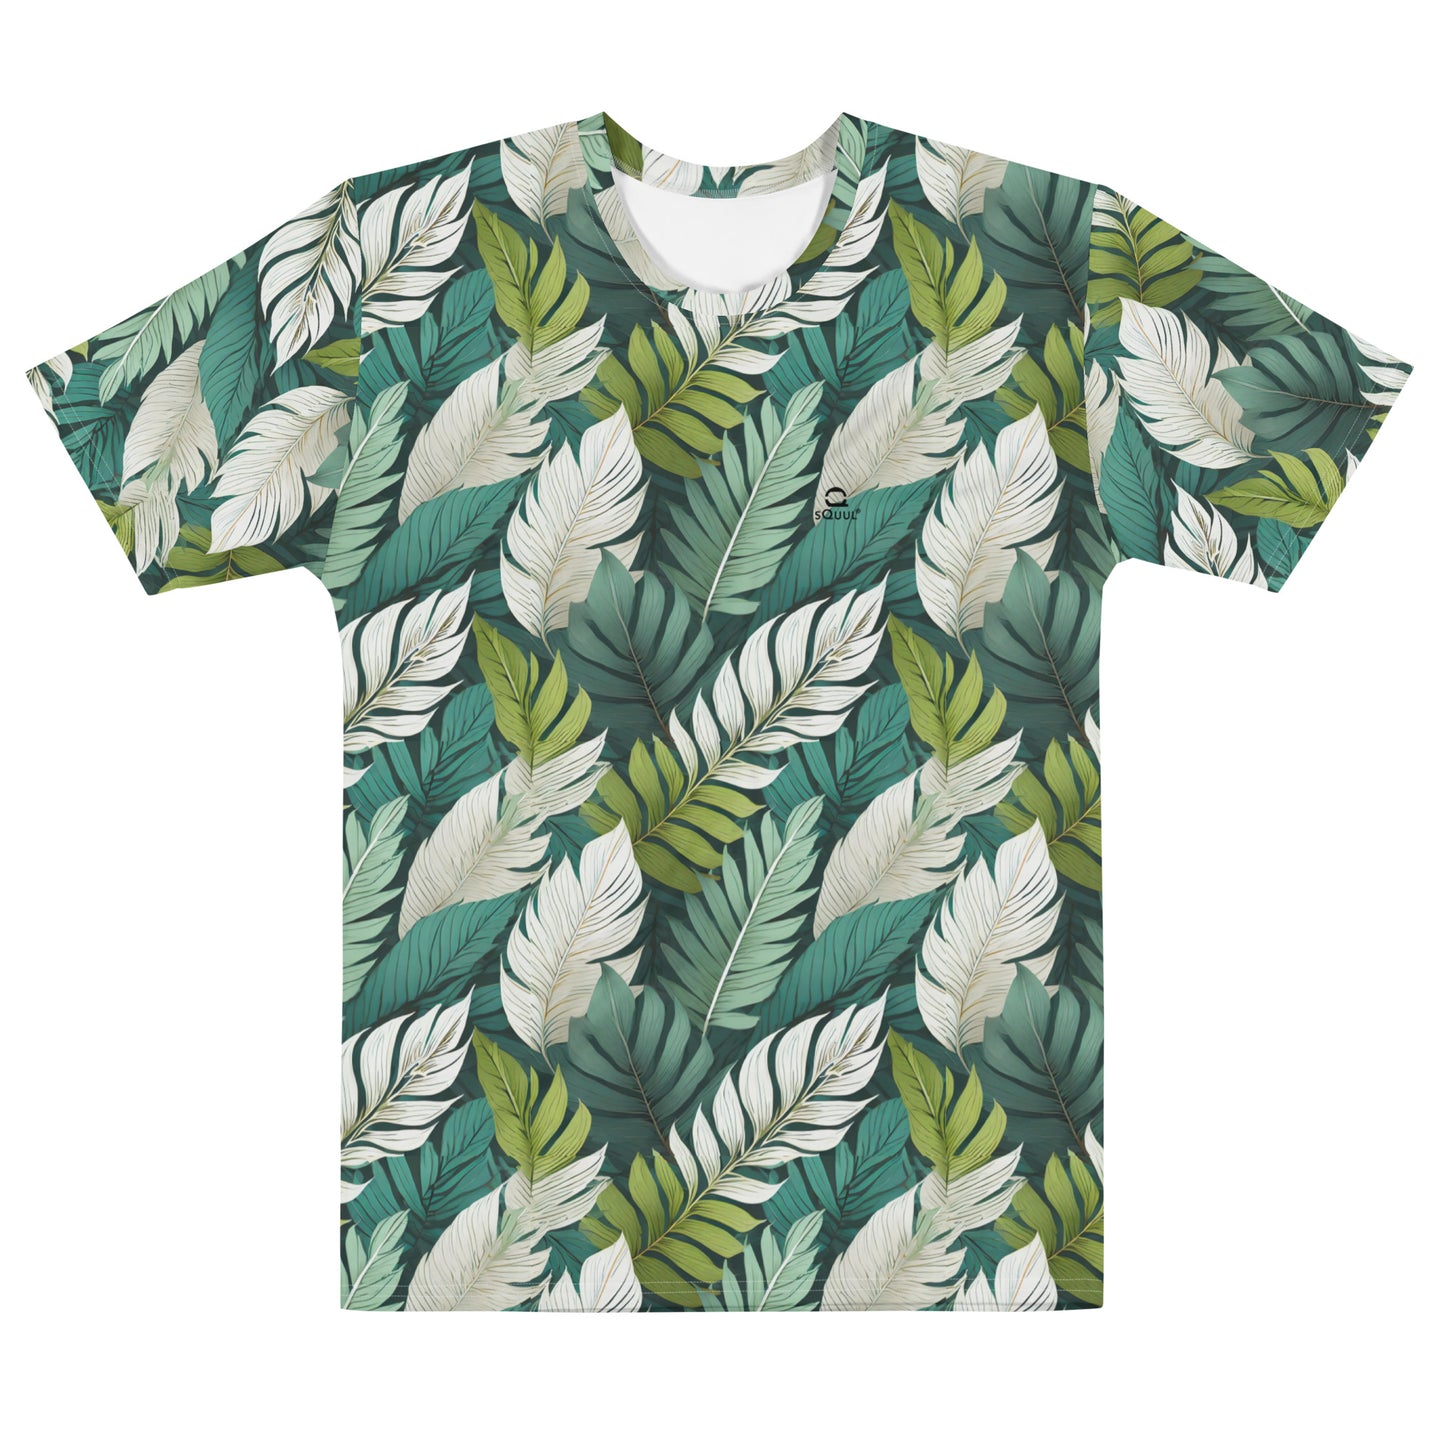 T-Shirt Tropical Leafs #SquulOfFlowers